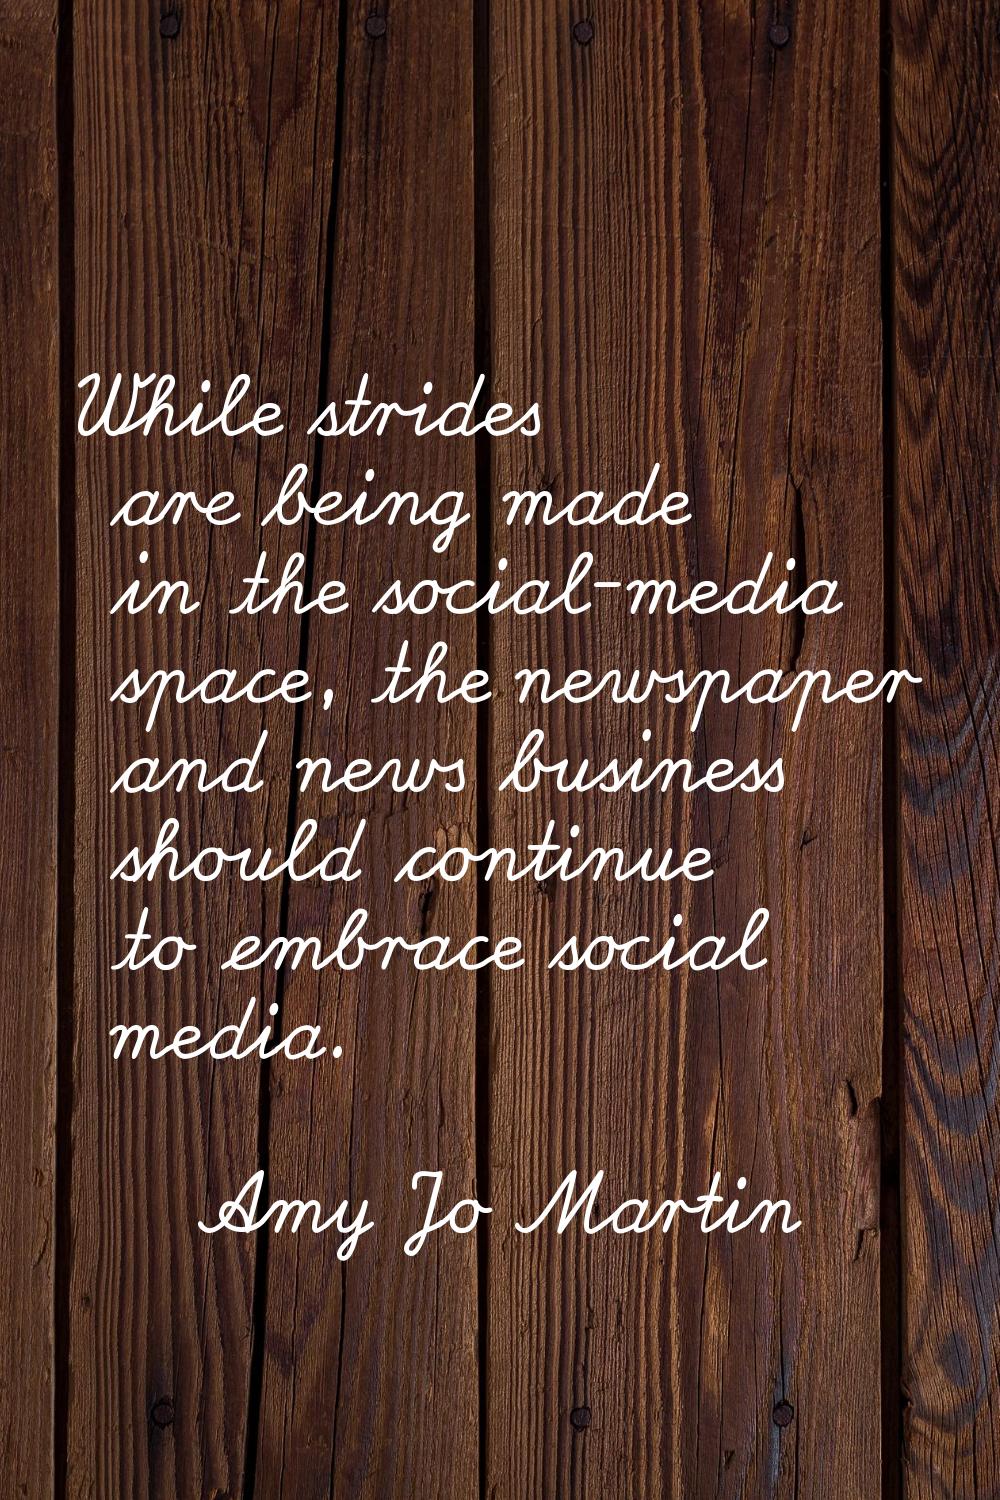 While strides are being made in the social-media space, the newspaper and news business should cont